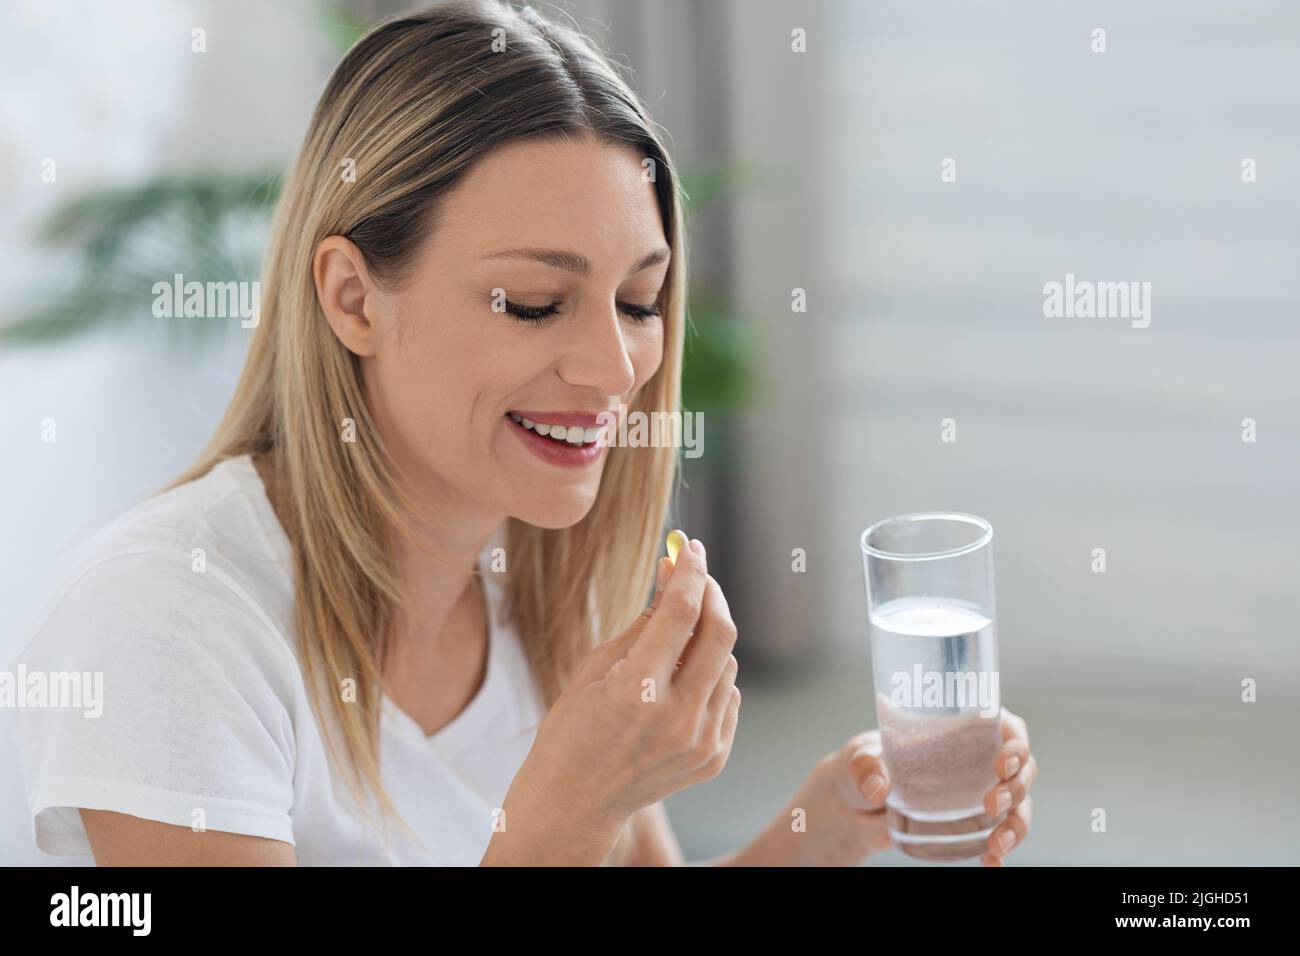 Smiling pretty woman taking pill after waking up, copy space Stock Photo